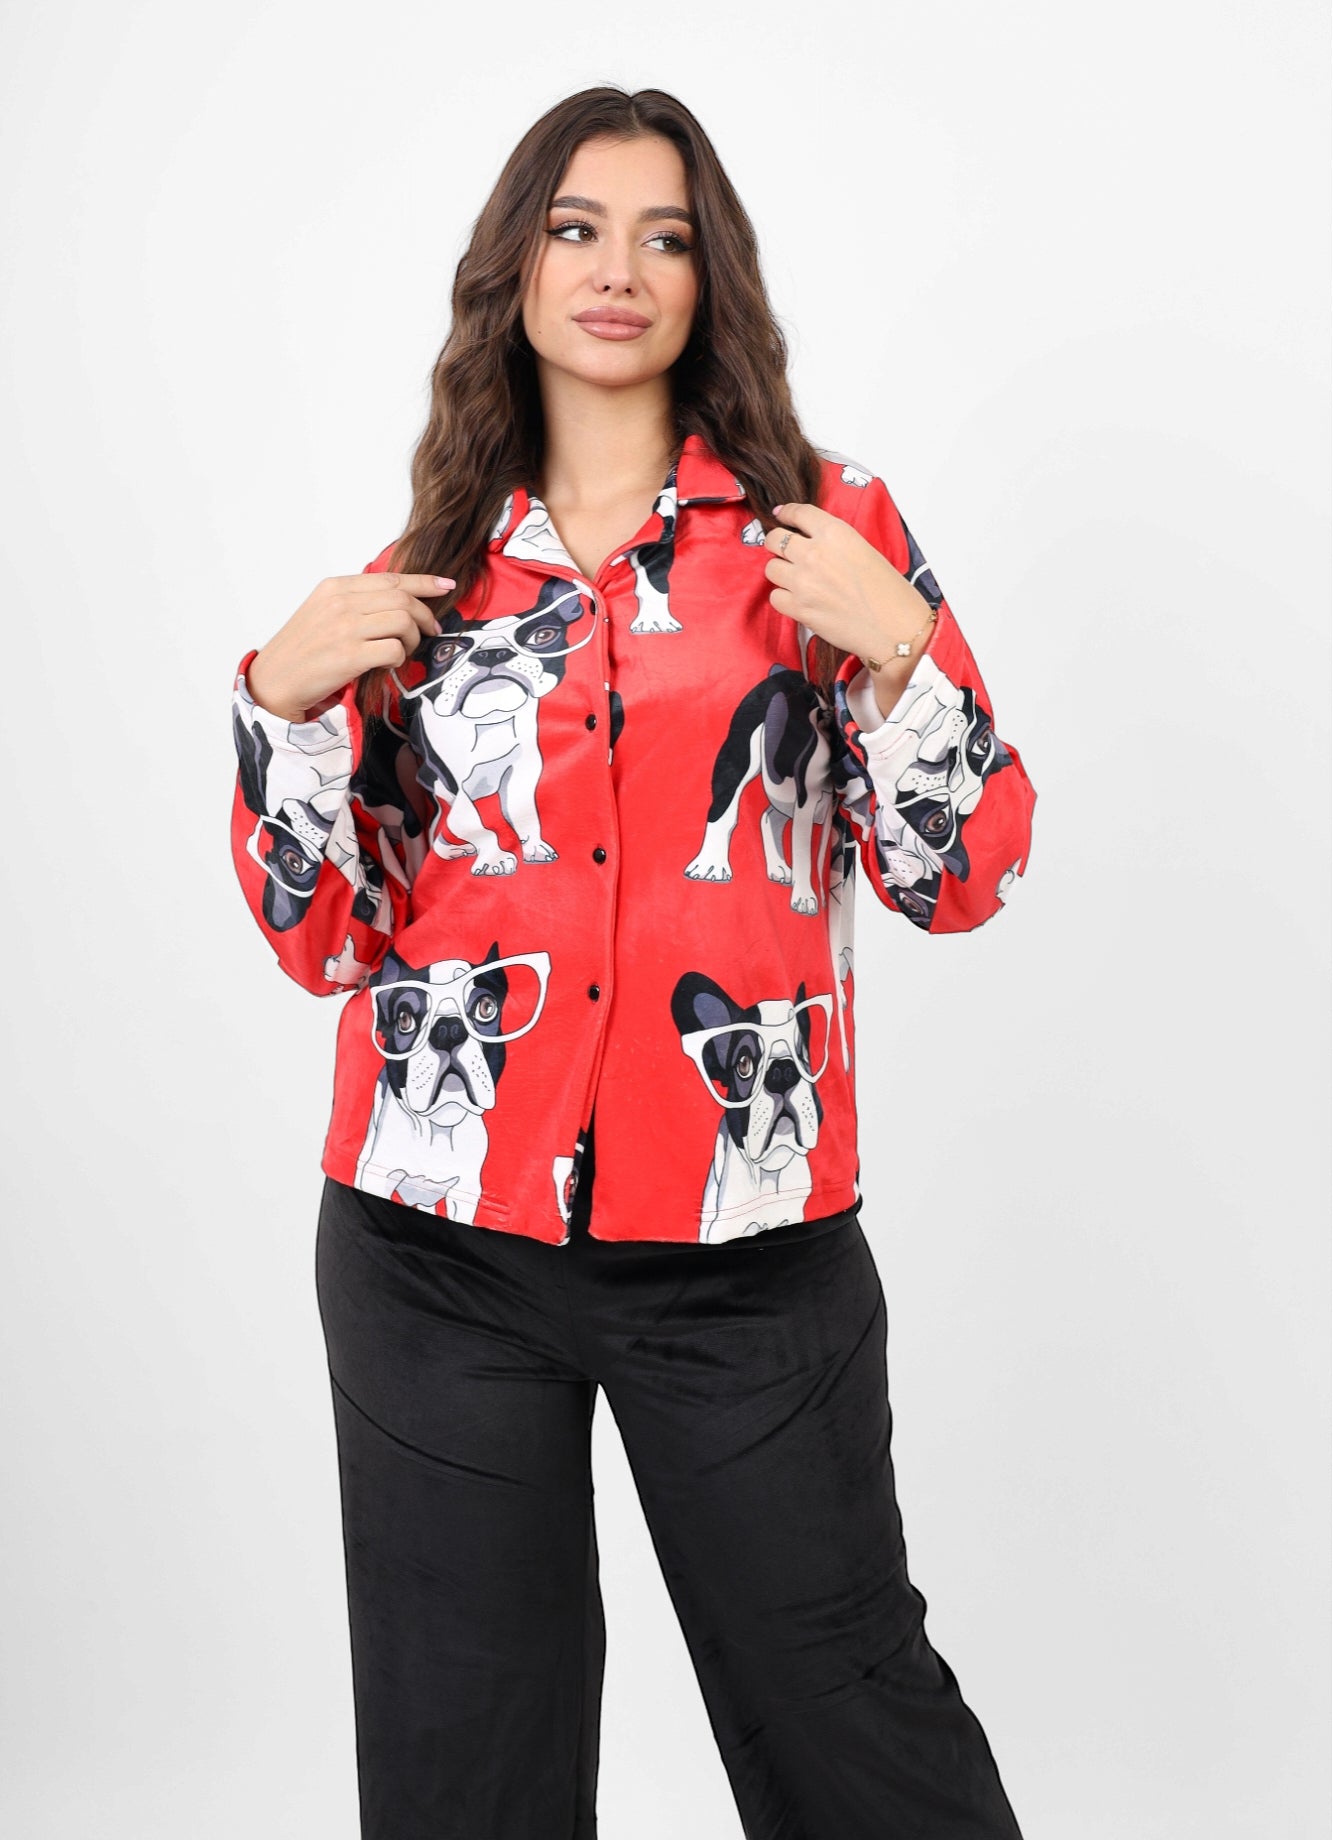 Bug top classic pjs - Red